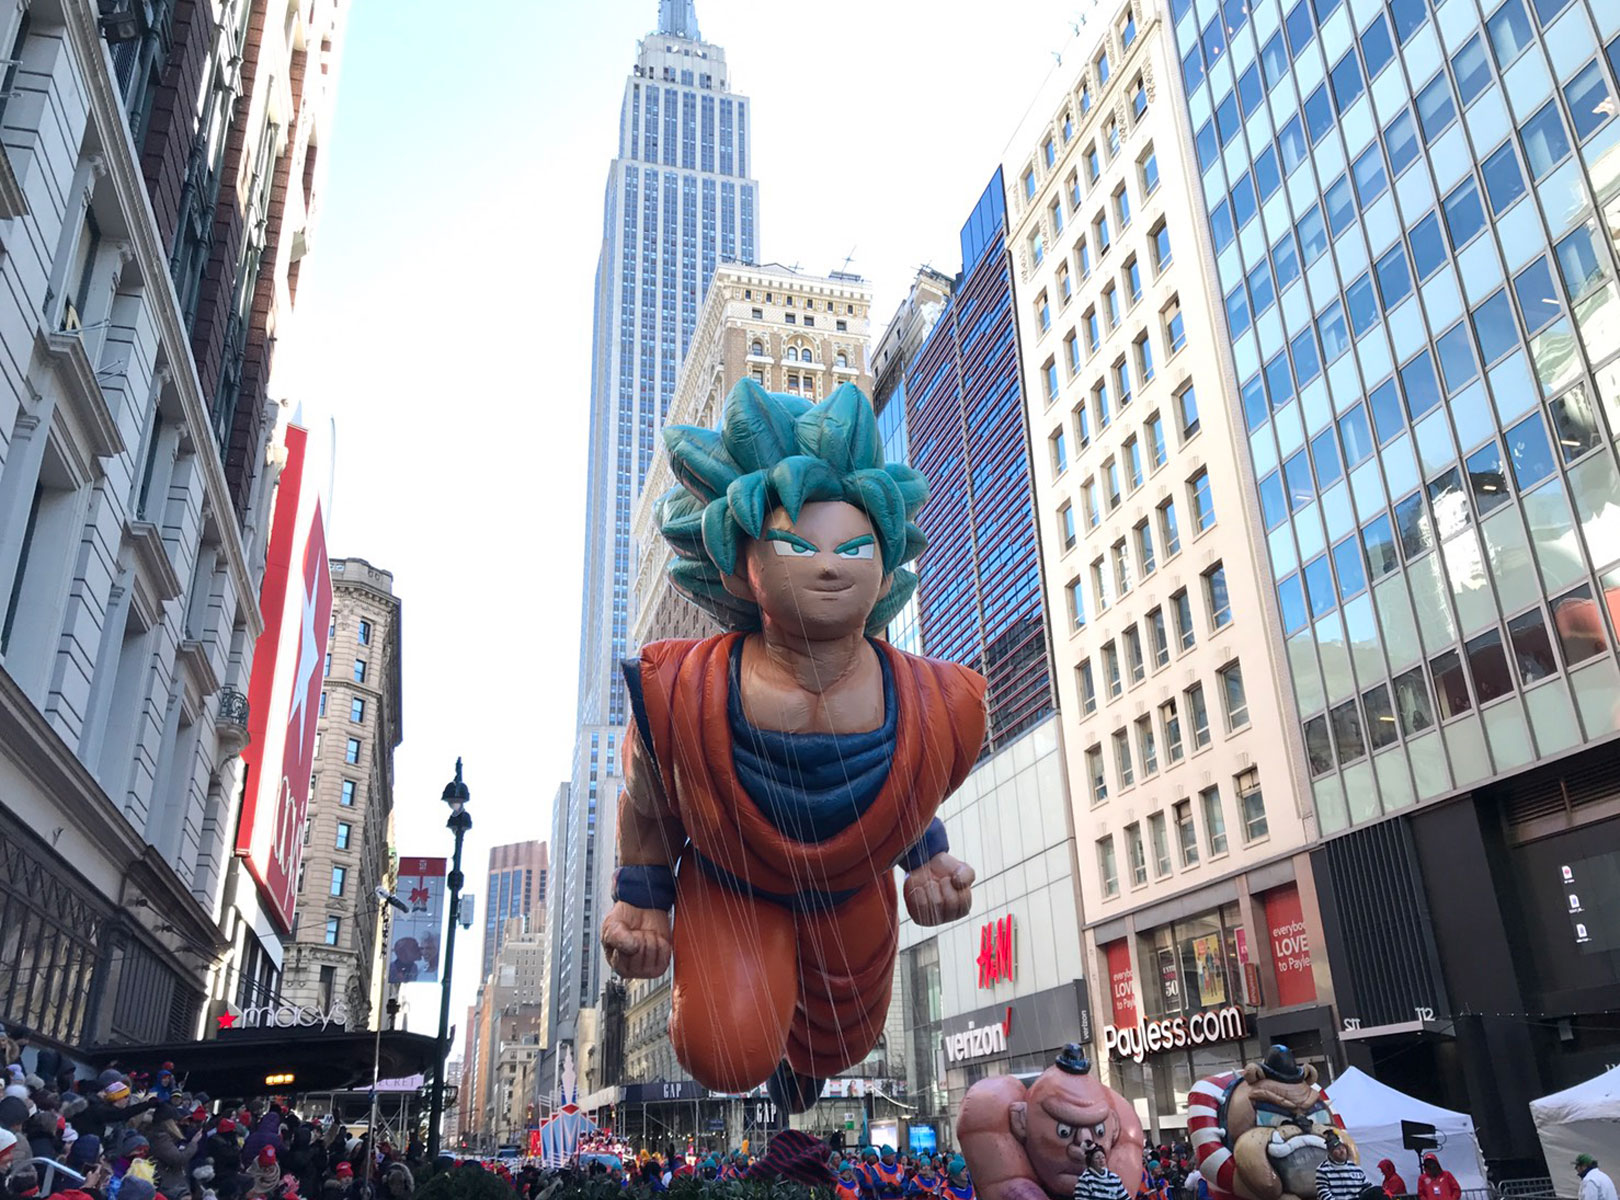 GOKU’S BACK TO SOAR IN THE 2019 MACY’S THANKSGIVING DAY PARADE!